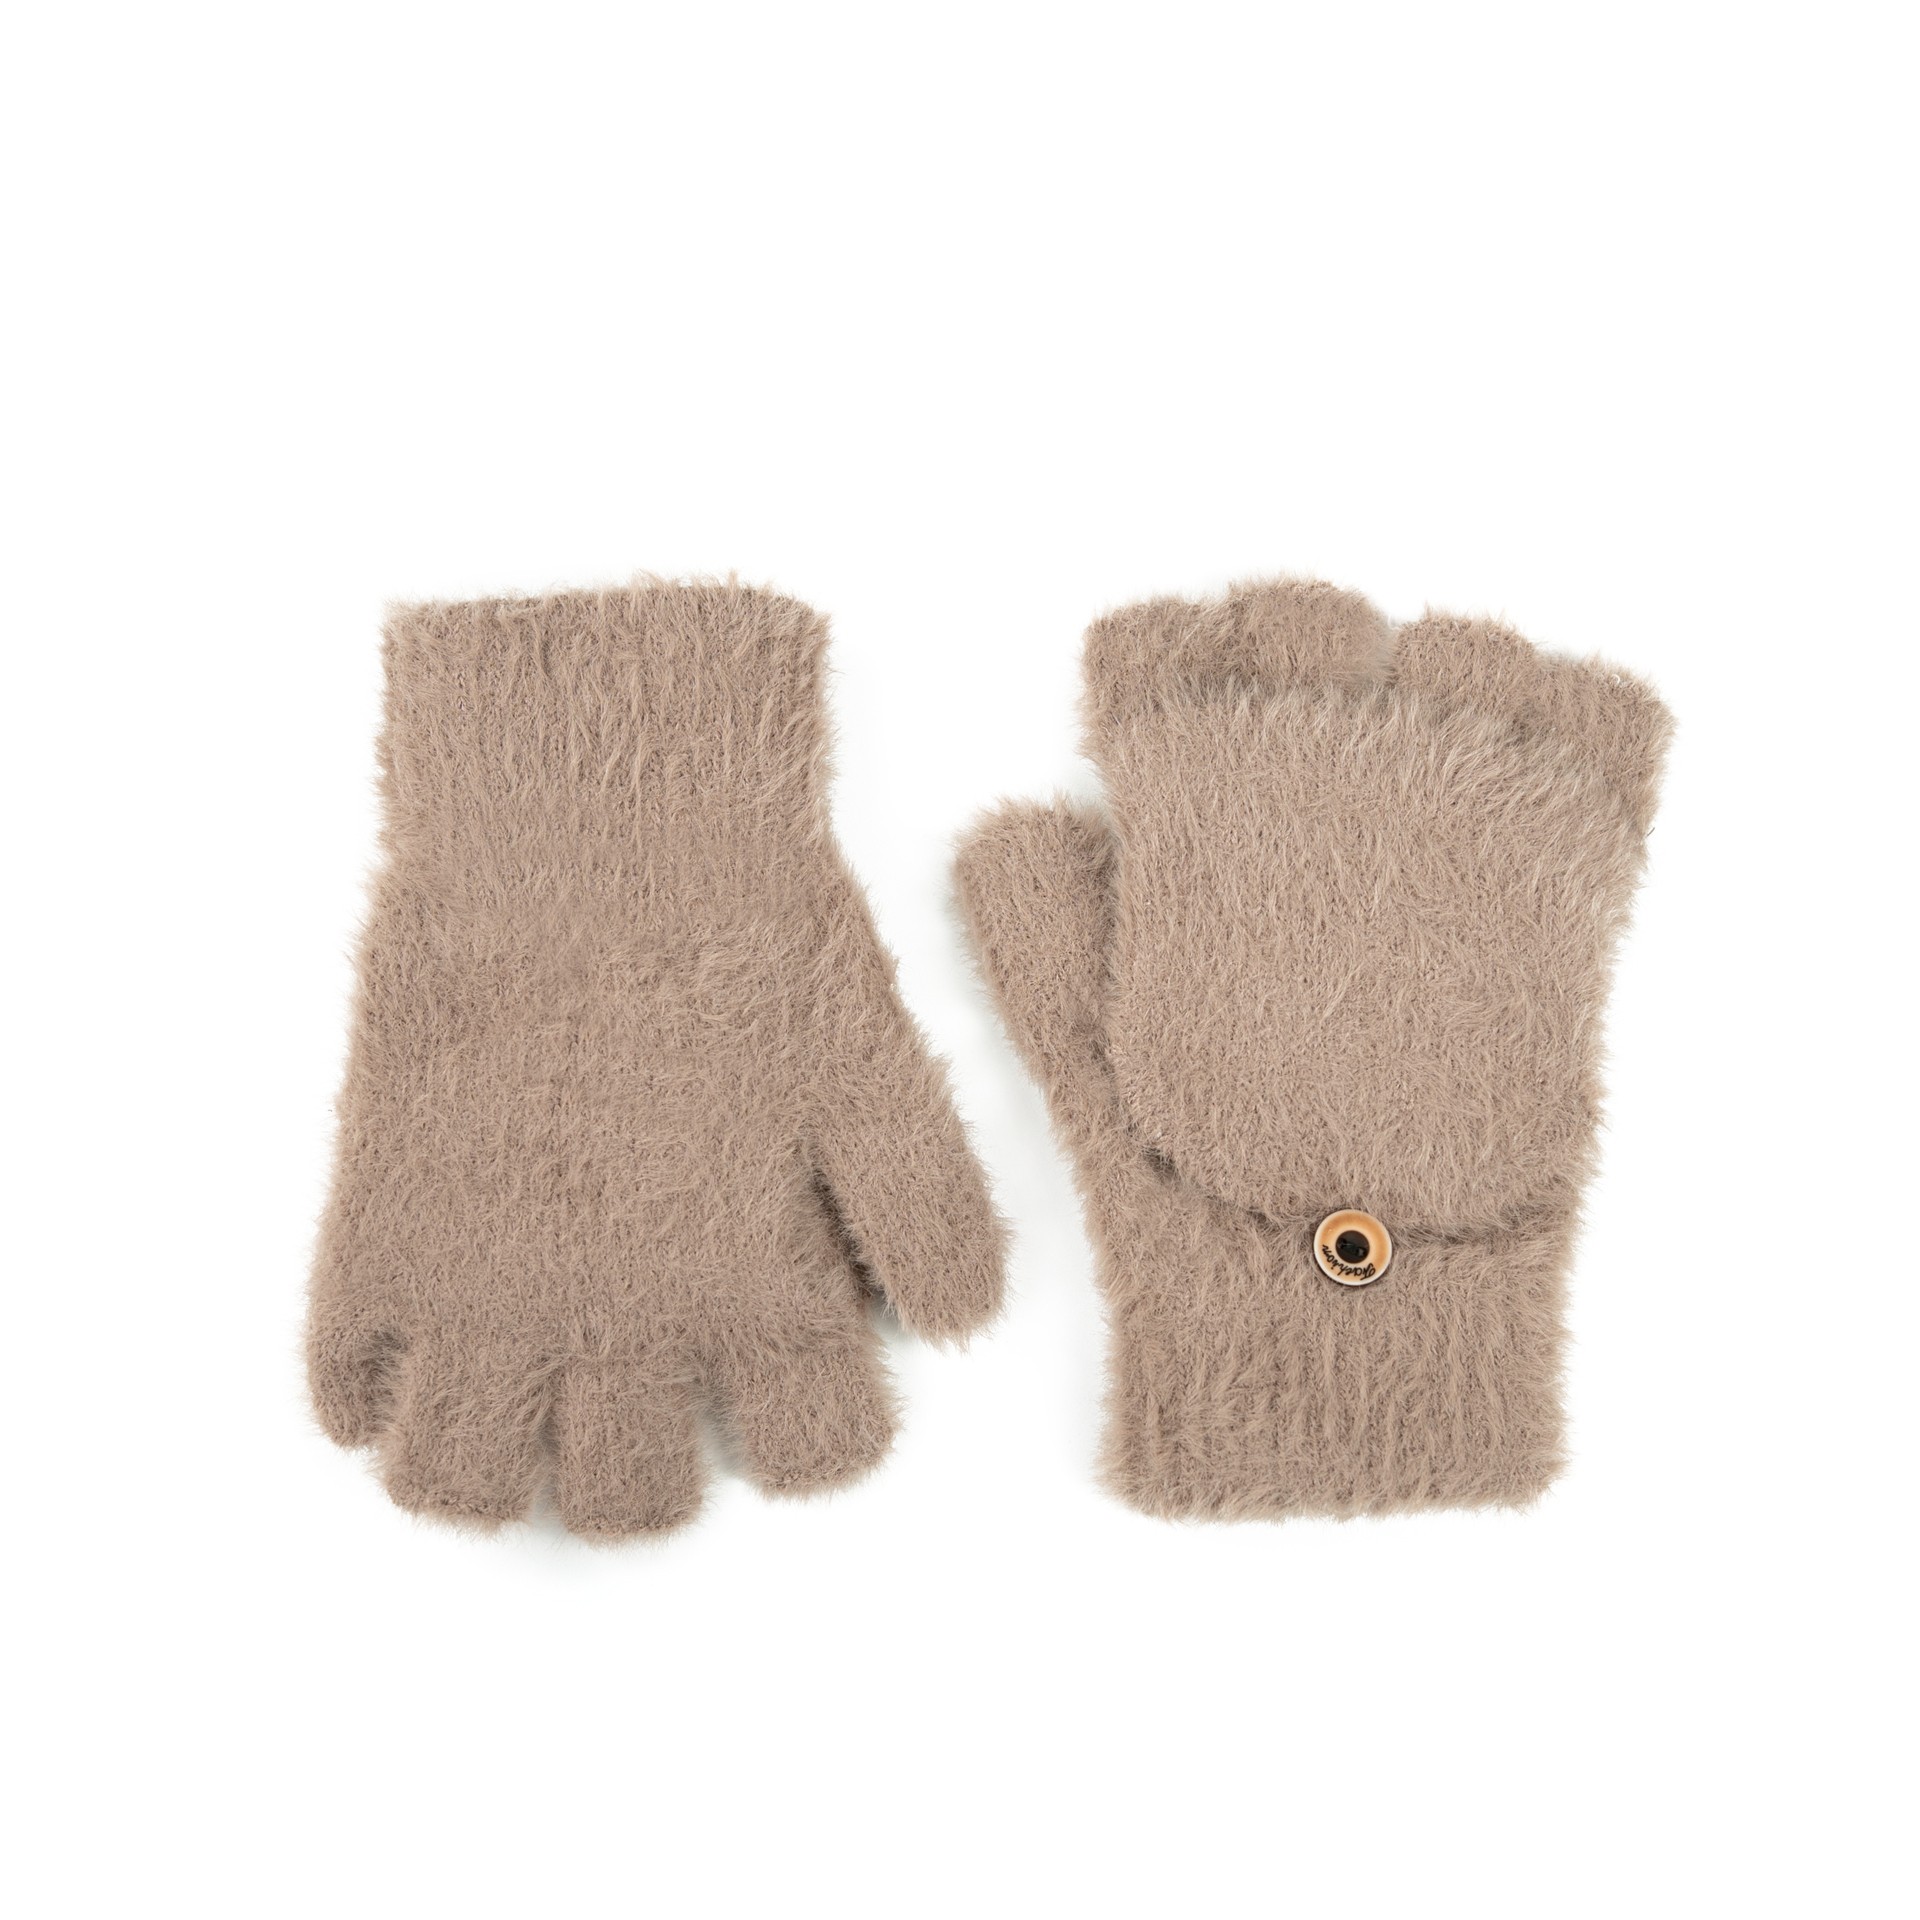 Art Of Polo Woman's Gloves Rk22296